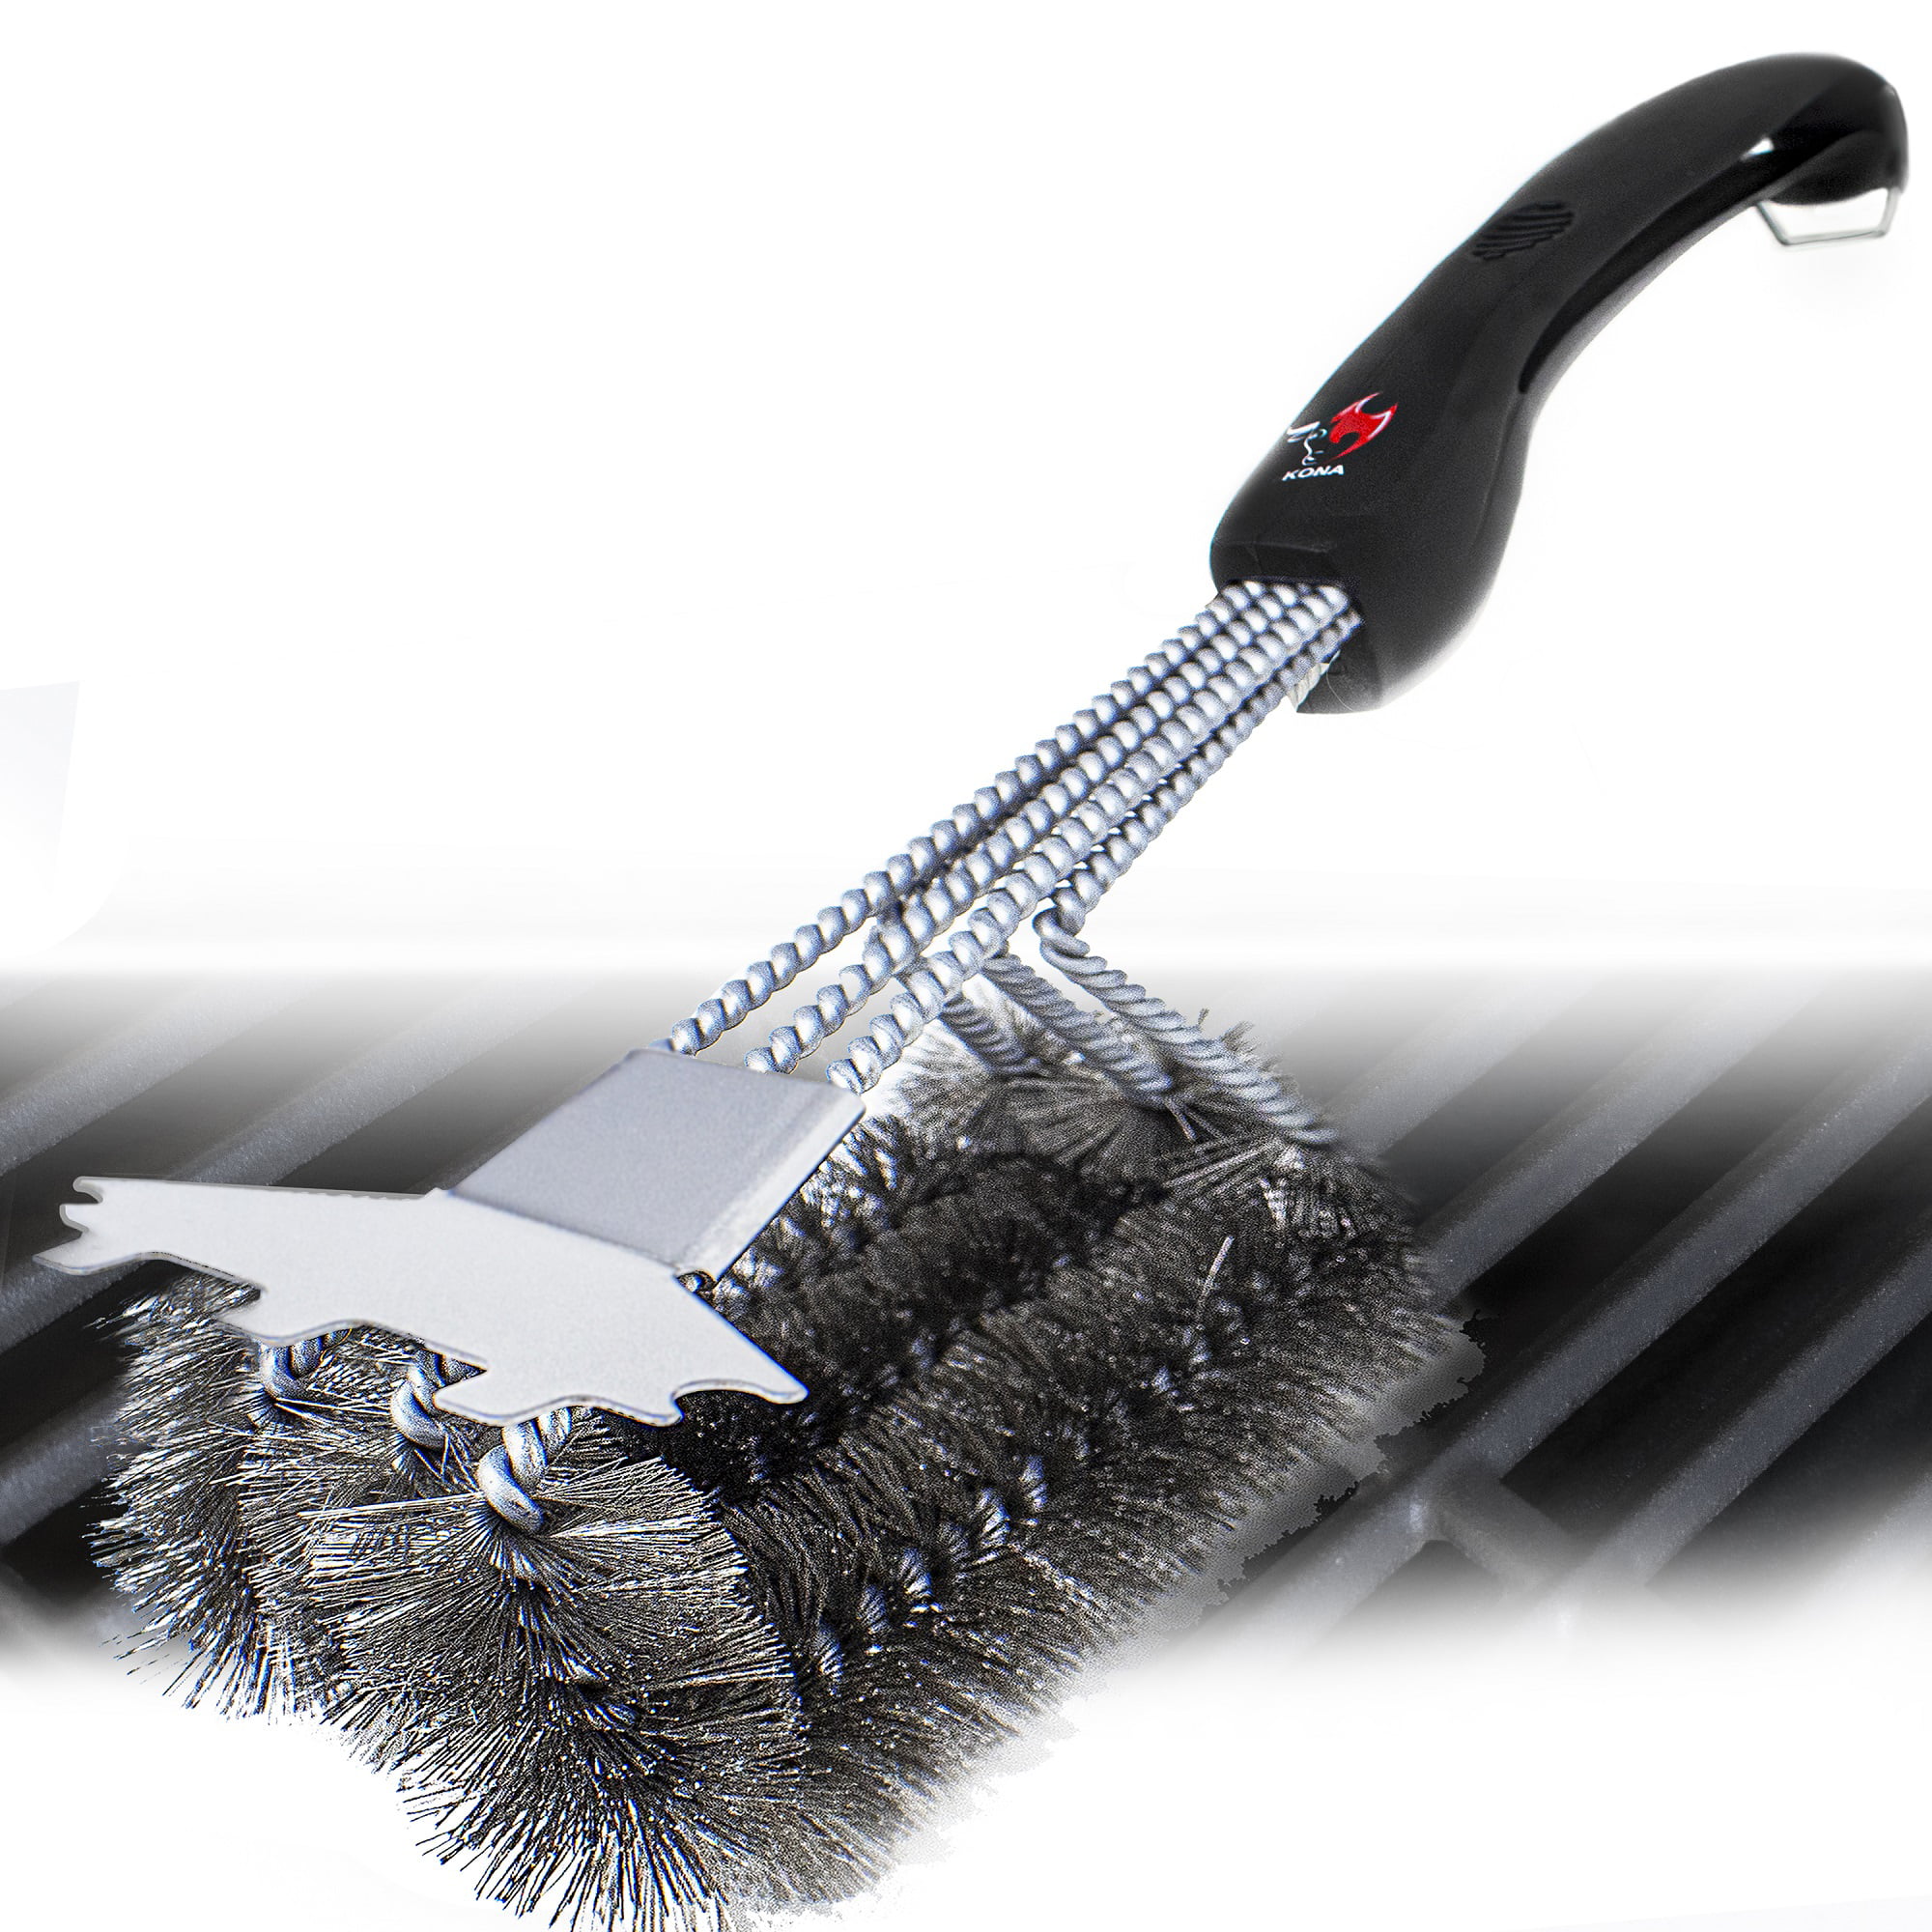 Safe/Clean Bristle-Free Grill Brush with Speed/Scrape Scraper - 18 Stainless Steel